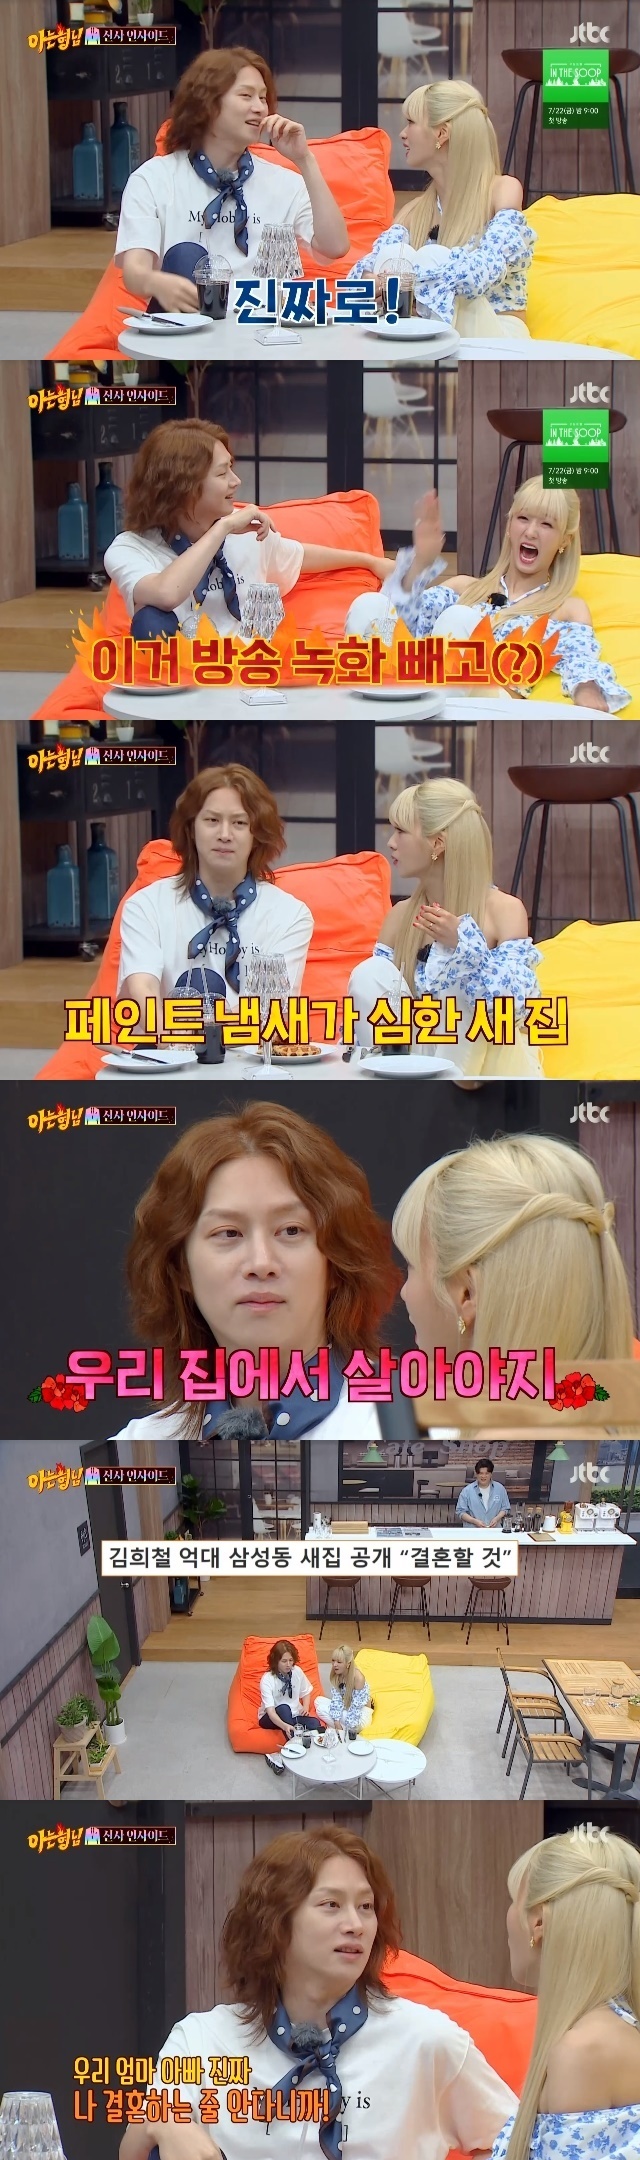 Kim Hee-chul has sincerely offered Yoon Bomi a marriage next year to draw attention.In the 340th episode of JTBCs entertainment Knowing Bros (hereinafter referred to as The Little Brother), which aired on July 9, Ji Hyun Woo, Young Tak and A Pink Yoon Bomi appeared as guests and challenged the acting of Inside contest.The concept of acting in the contest was Yoon Bomi and boyfriends. The so-called gentleman inside whose boyfriends face changes constantly.To Kim Hee-chul, who appeared following Ji Hyun Woo, Young Tak and Kim Young-chul, Yoon Bomi introduced the seven-year long-term love concept.Kim Hee-chul was embarrassed for a while. We should get married now. When are we married? This is my mother Father.Mom Father told me to marry next year with real, he said.Yoon Bomi said, Will we marry next year? Kim Hee-chul said, Do you really want to do it except broadcast?Then, when Yoon Bomi said that the smell of cement was bad at home, he said, I should live in my house. You did not see the article. I bought my house.Kim Hee-chul recently unveiled a new house in Samsung-dong, which is worth 5 billion won.Kim Hee-chul once again mentioned marriage, saying, My mother Father knows I am really married, but Yoon Bomi said, When will you go into your house?I was actively involved in the bathroom and laughed at the words, Shindong said, I bought an expensive house, so go to my bathroom.On the other hand, Seo Jang-hoon was attacked by Yoon Bomi, who said when Seo Jang-hoon appeared as a boyfriend, Weve been together for 10 years.Its time to get married, but our Father is against it.When Seo Jang-hoon said, I think I would oppose it, Yoon Bomi said, Why did you go there once? Whats wrong with that?Seo Jang-hoon married Oh Jung-yeon, a broadcaster from the announcer in 2009, but divorced in 2012, three years later.